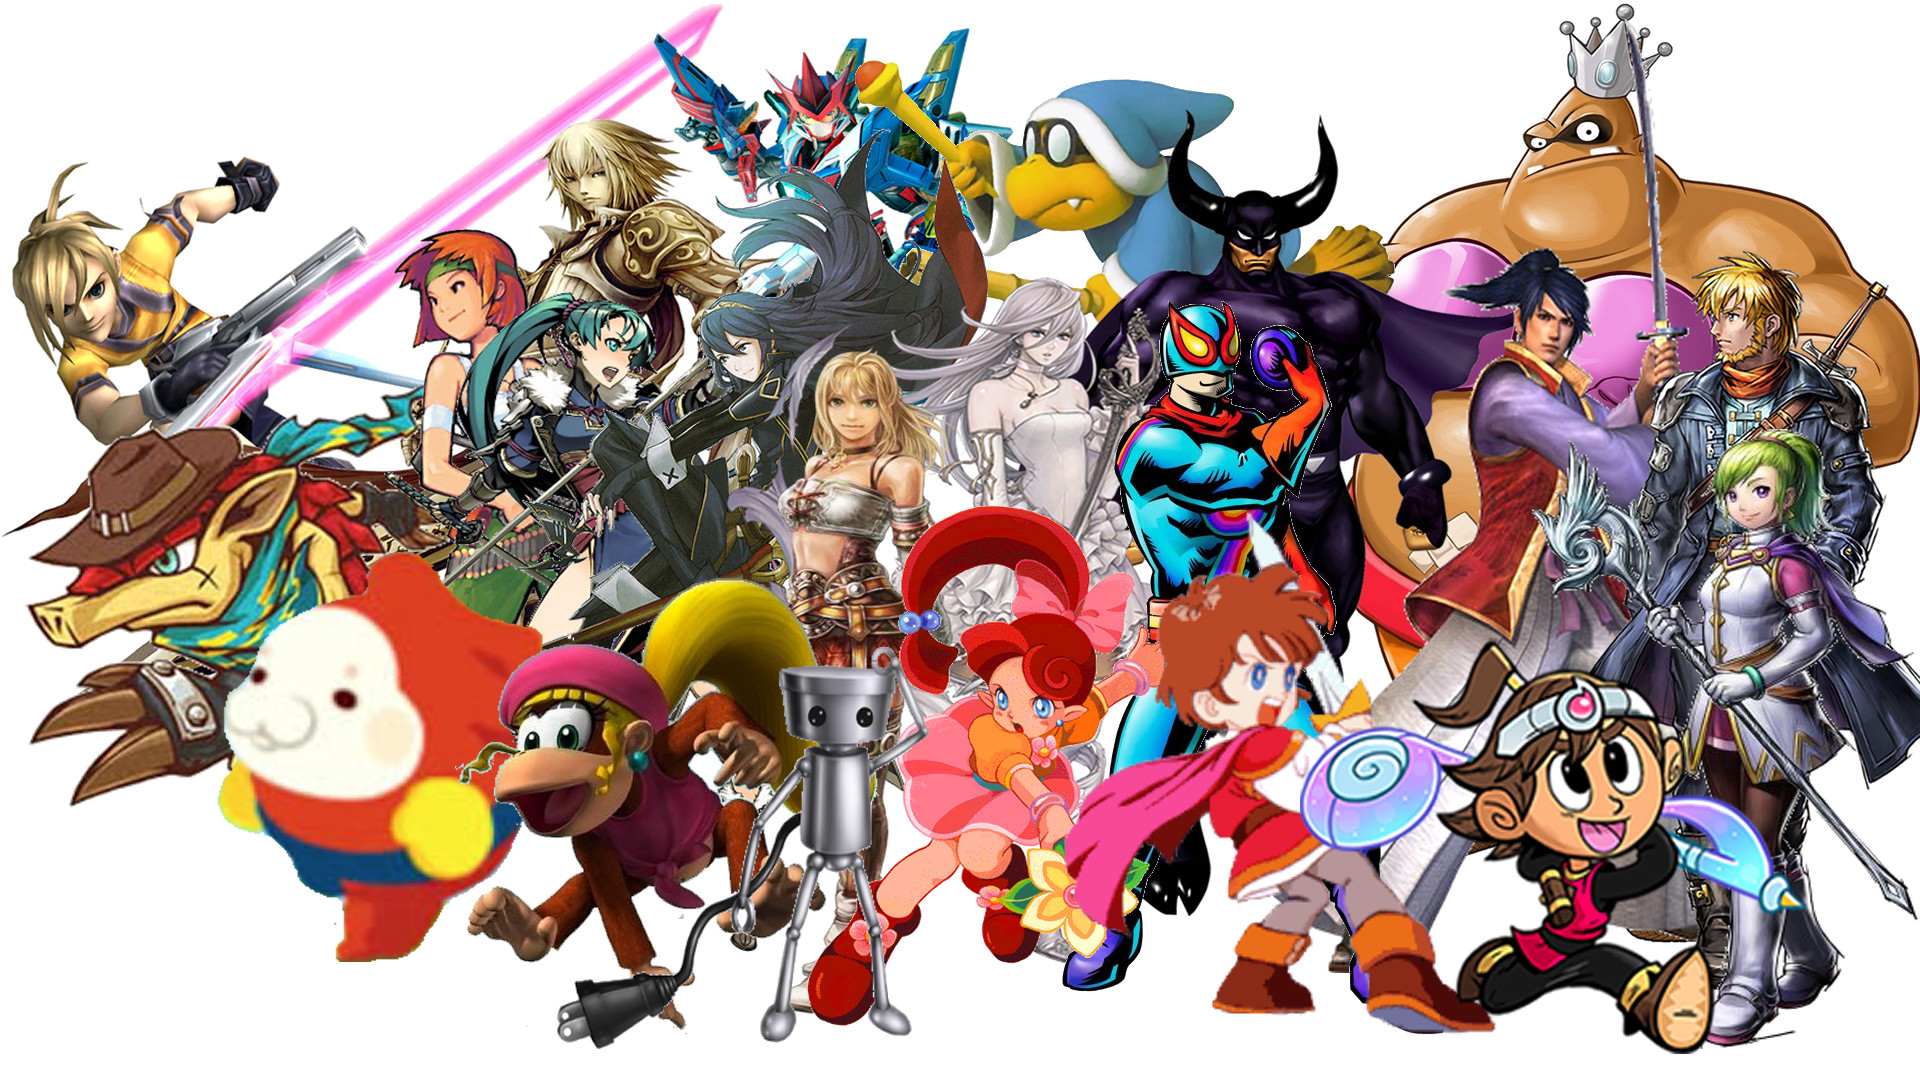 1920x1080 10 Super Smash Bros. For Nintendo 3ds And Wii U HD Wallpapers .